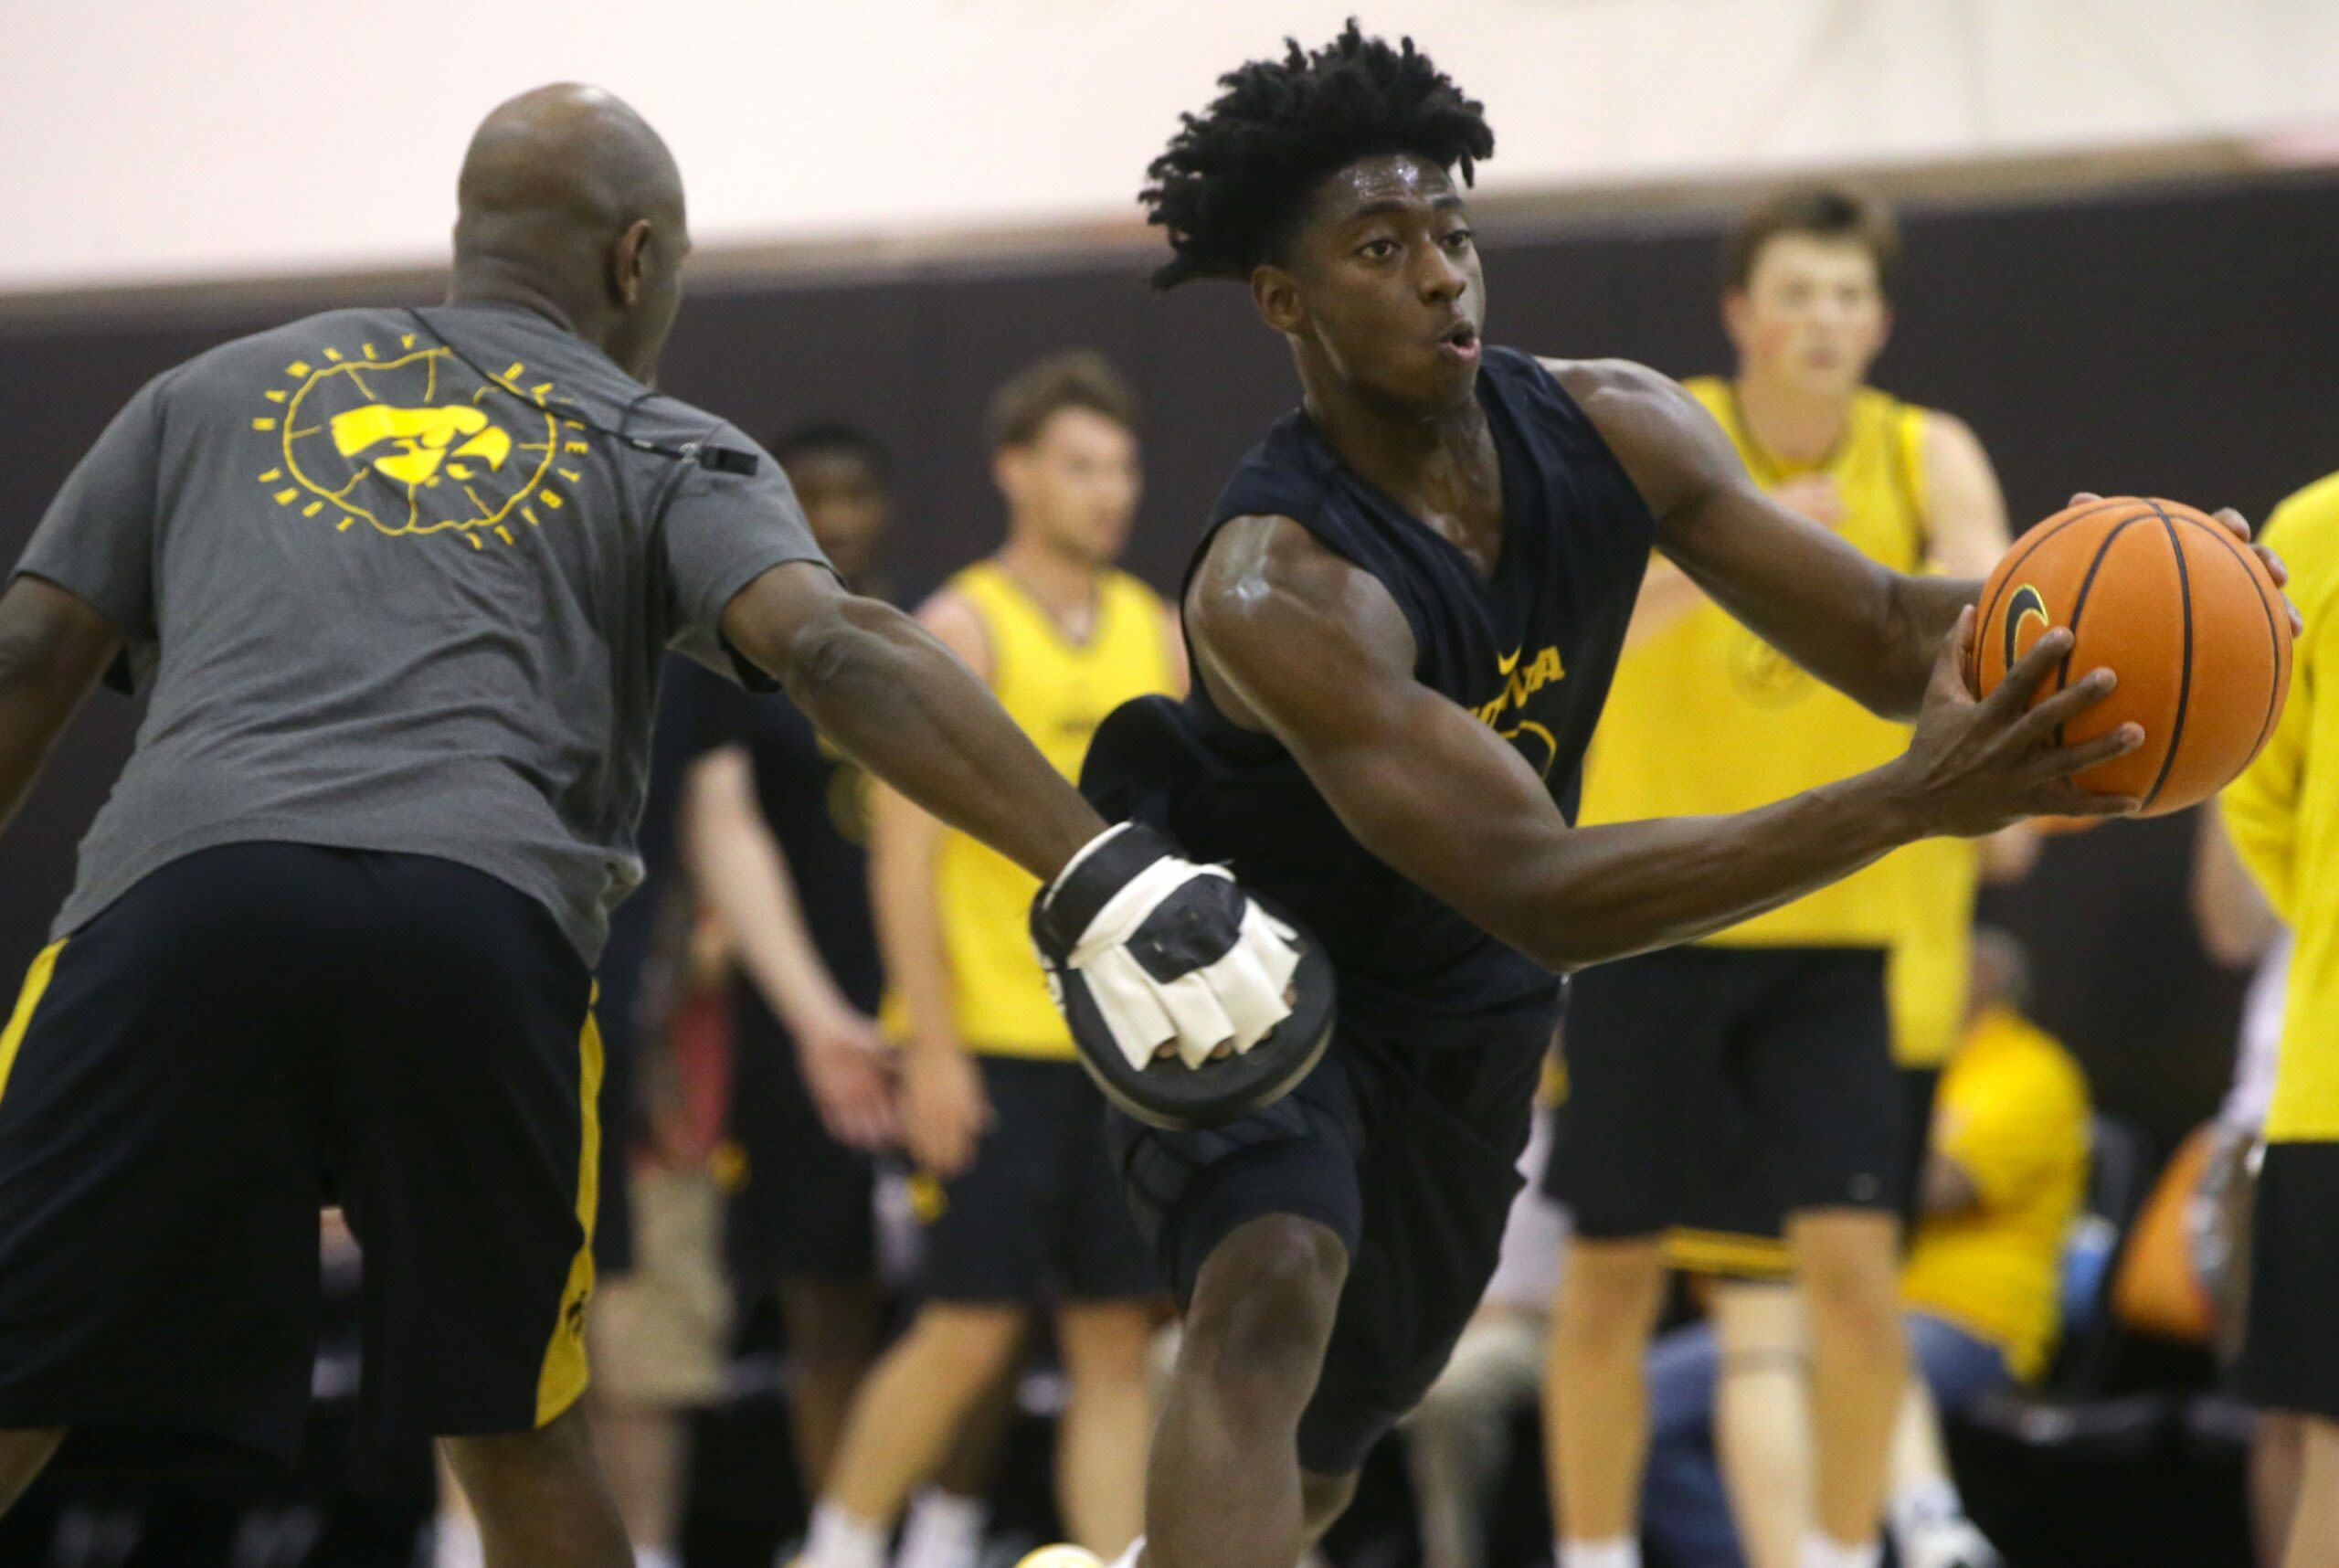 247Sports shares realistic expectations for Iowa basketball transfers